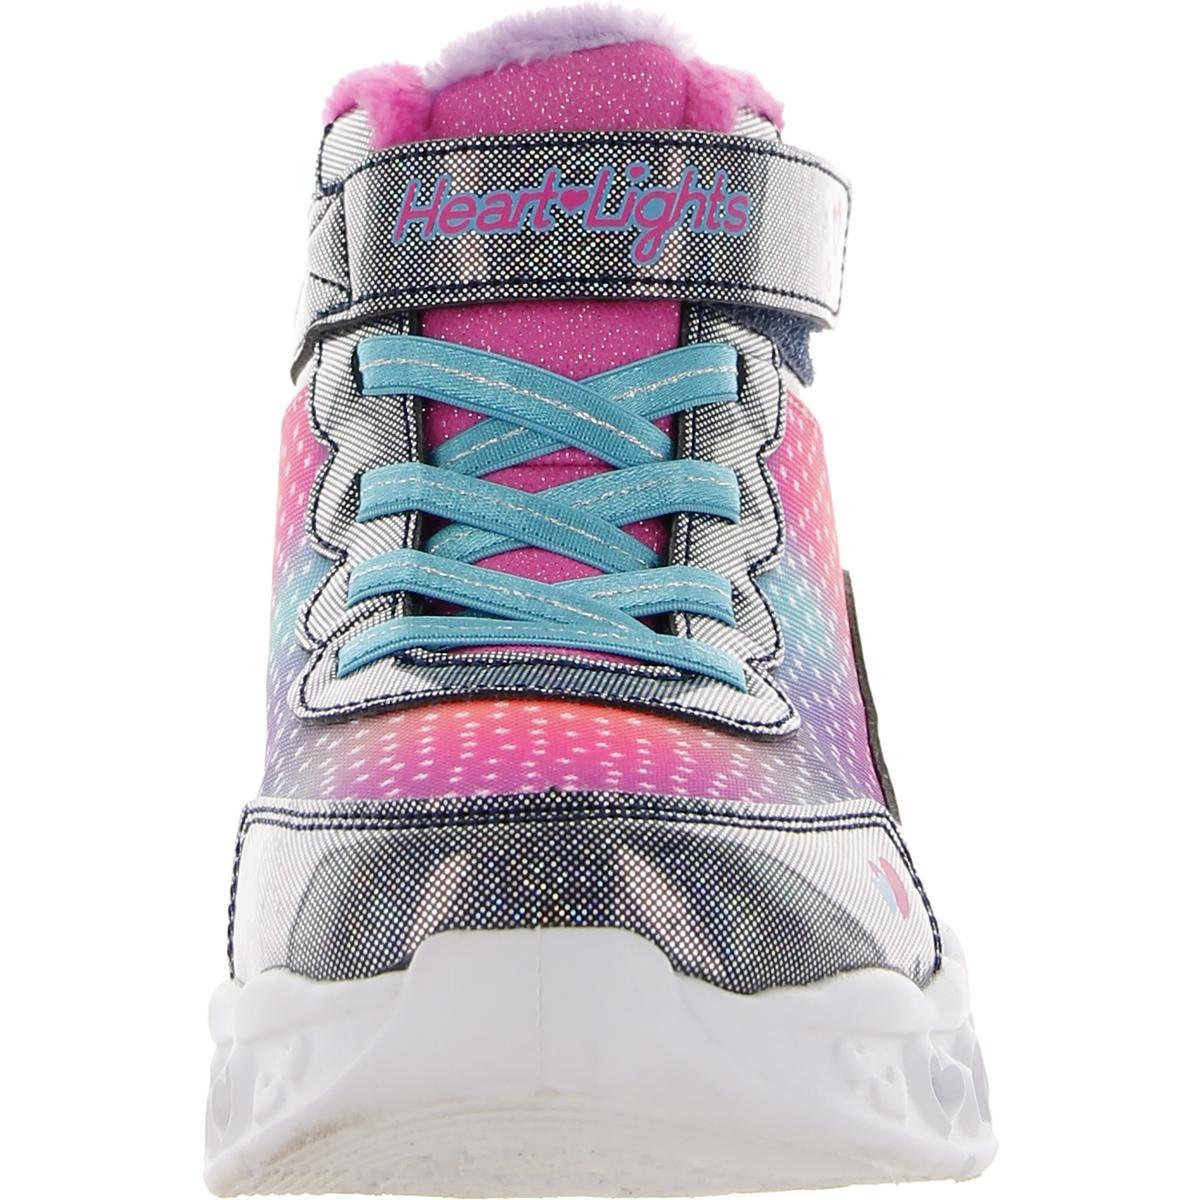 Skechers Simple Amor Girls Faux Fur High Top Light-Up Shoes